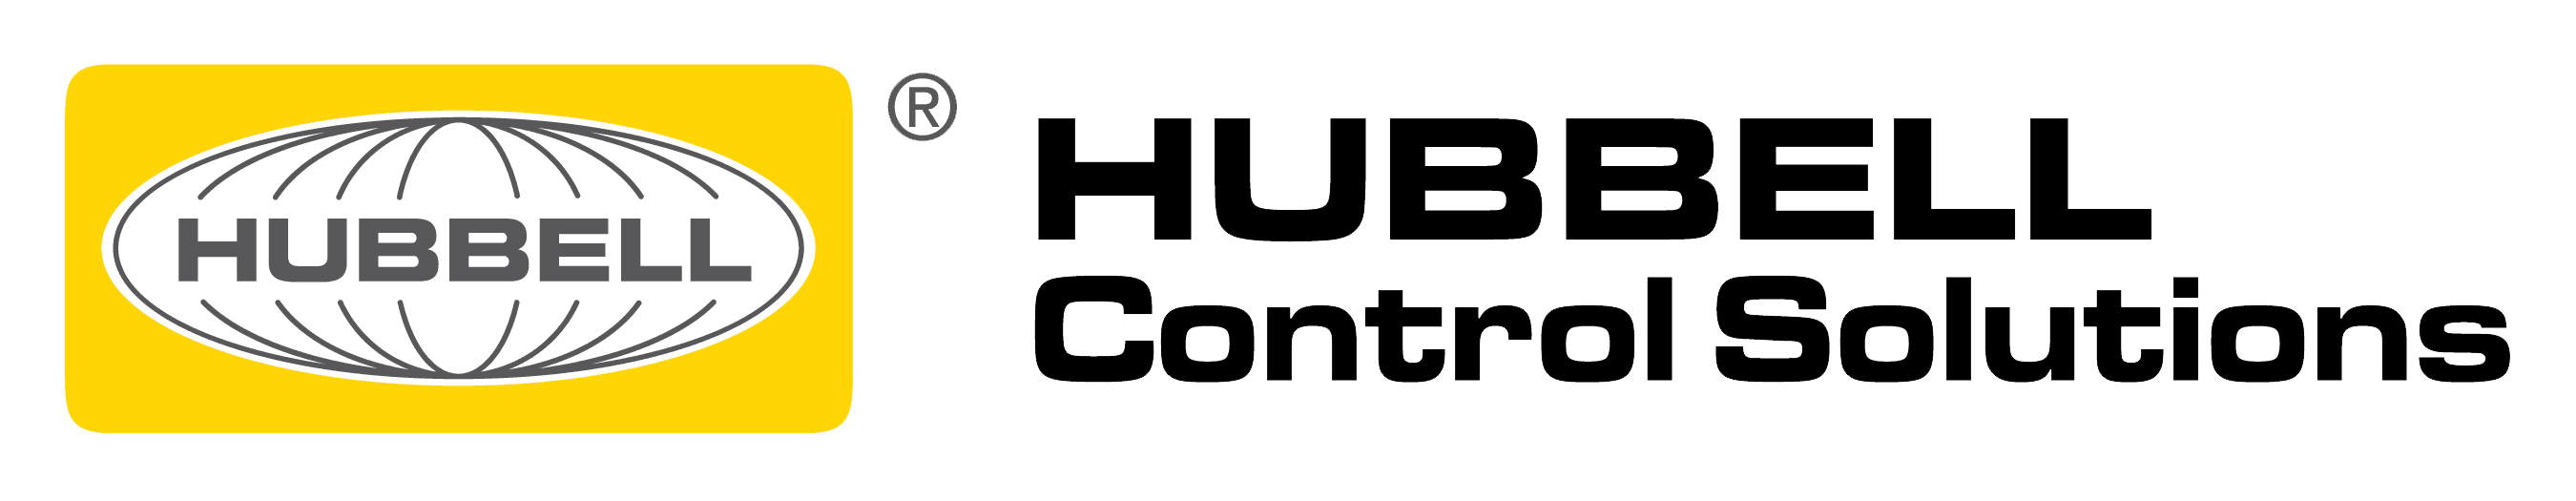 Hubbel Control Solutions